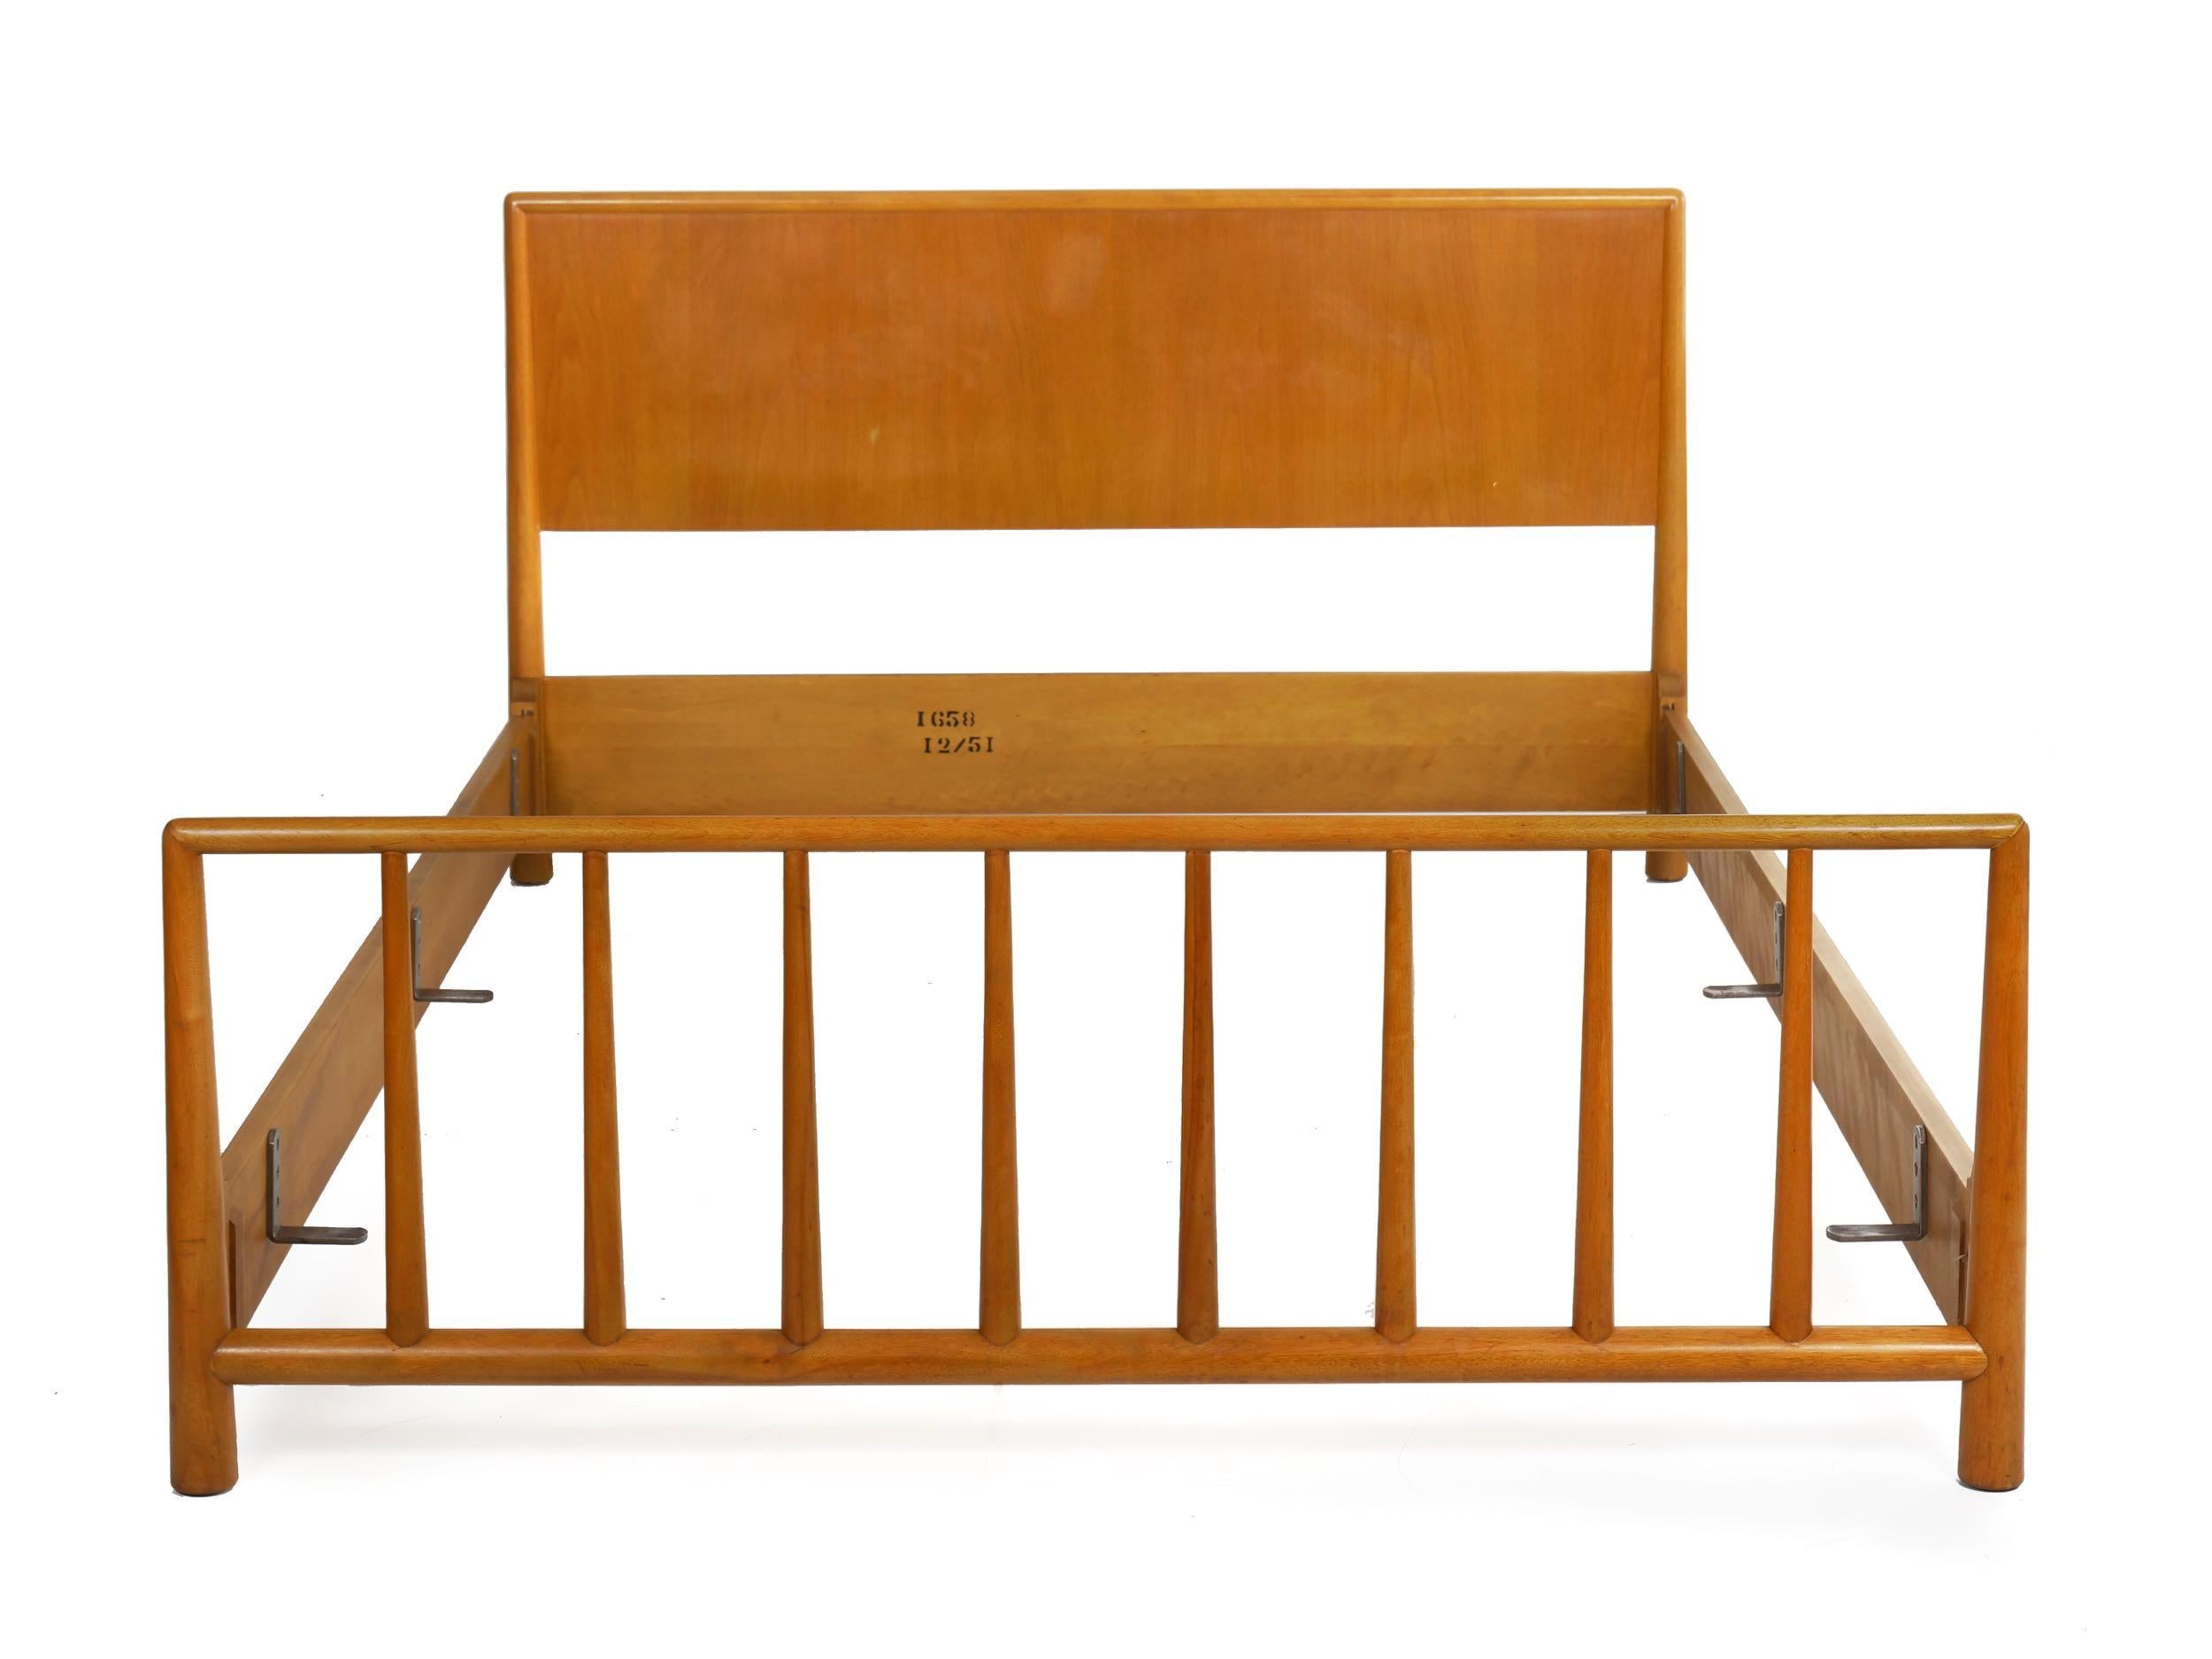 Modern spindle bed designed by T.H. Robsjohn-Gibbings for Widdicomb
United States, circa 1951; stamped 